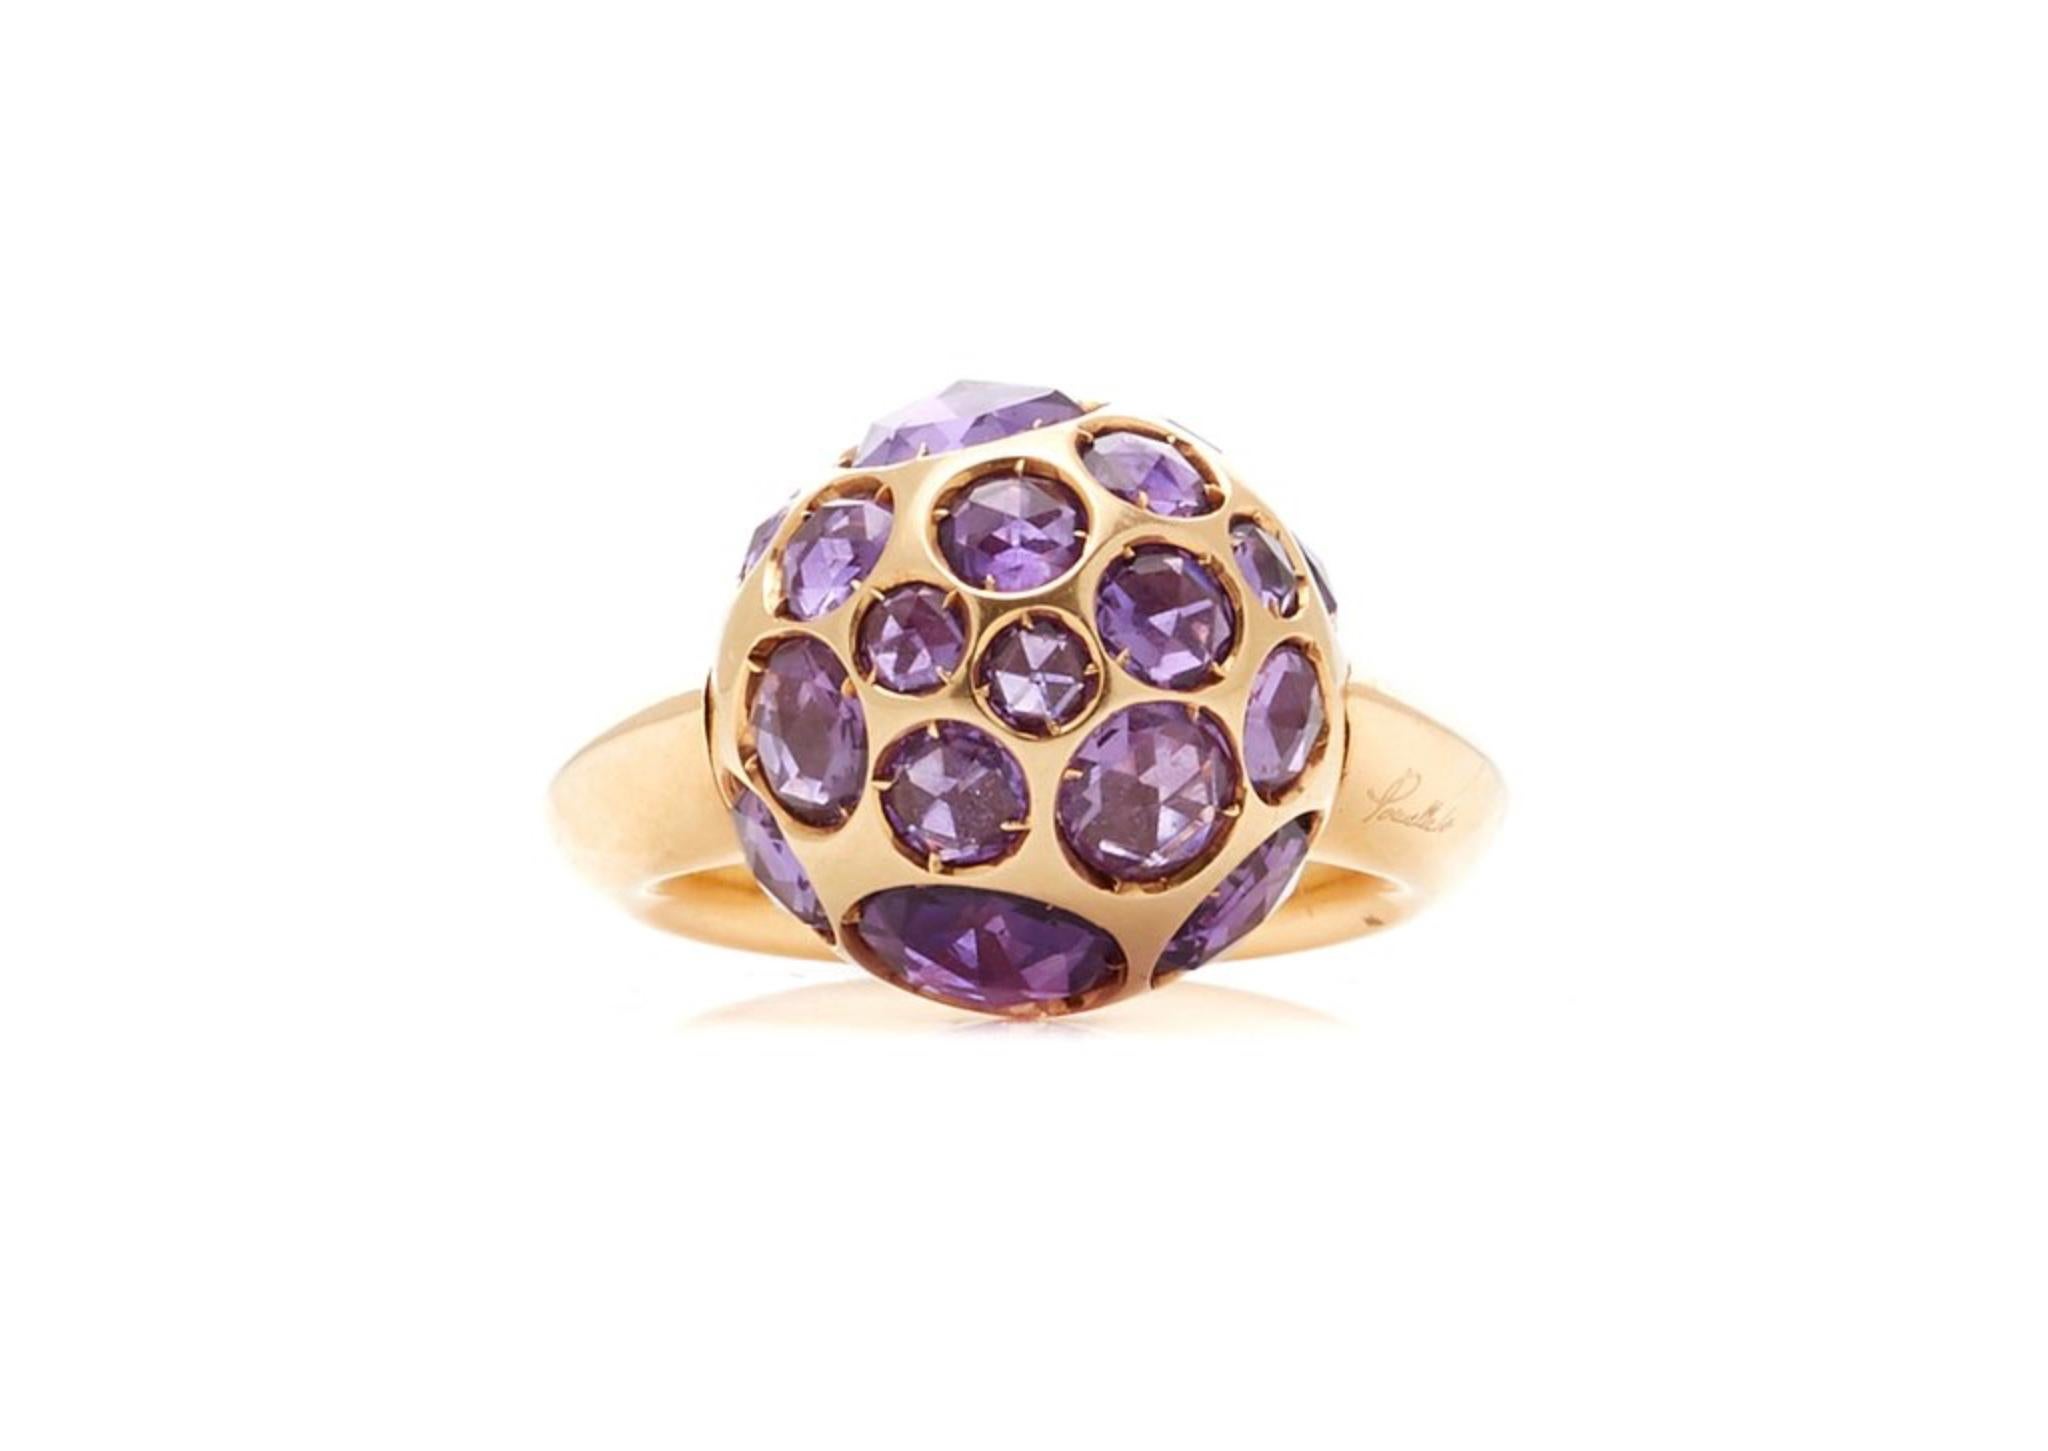 A chic amethyst harem ring by Pomellato featuring rose cut amethysts set in 18 karat yellow gold. Currently size 7.25 and can be resized.